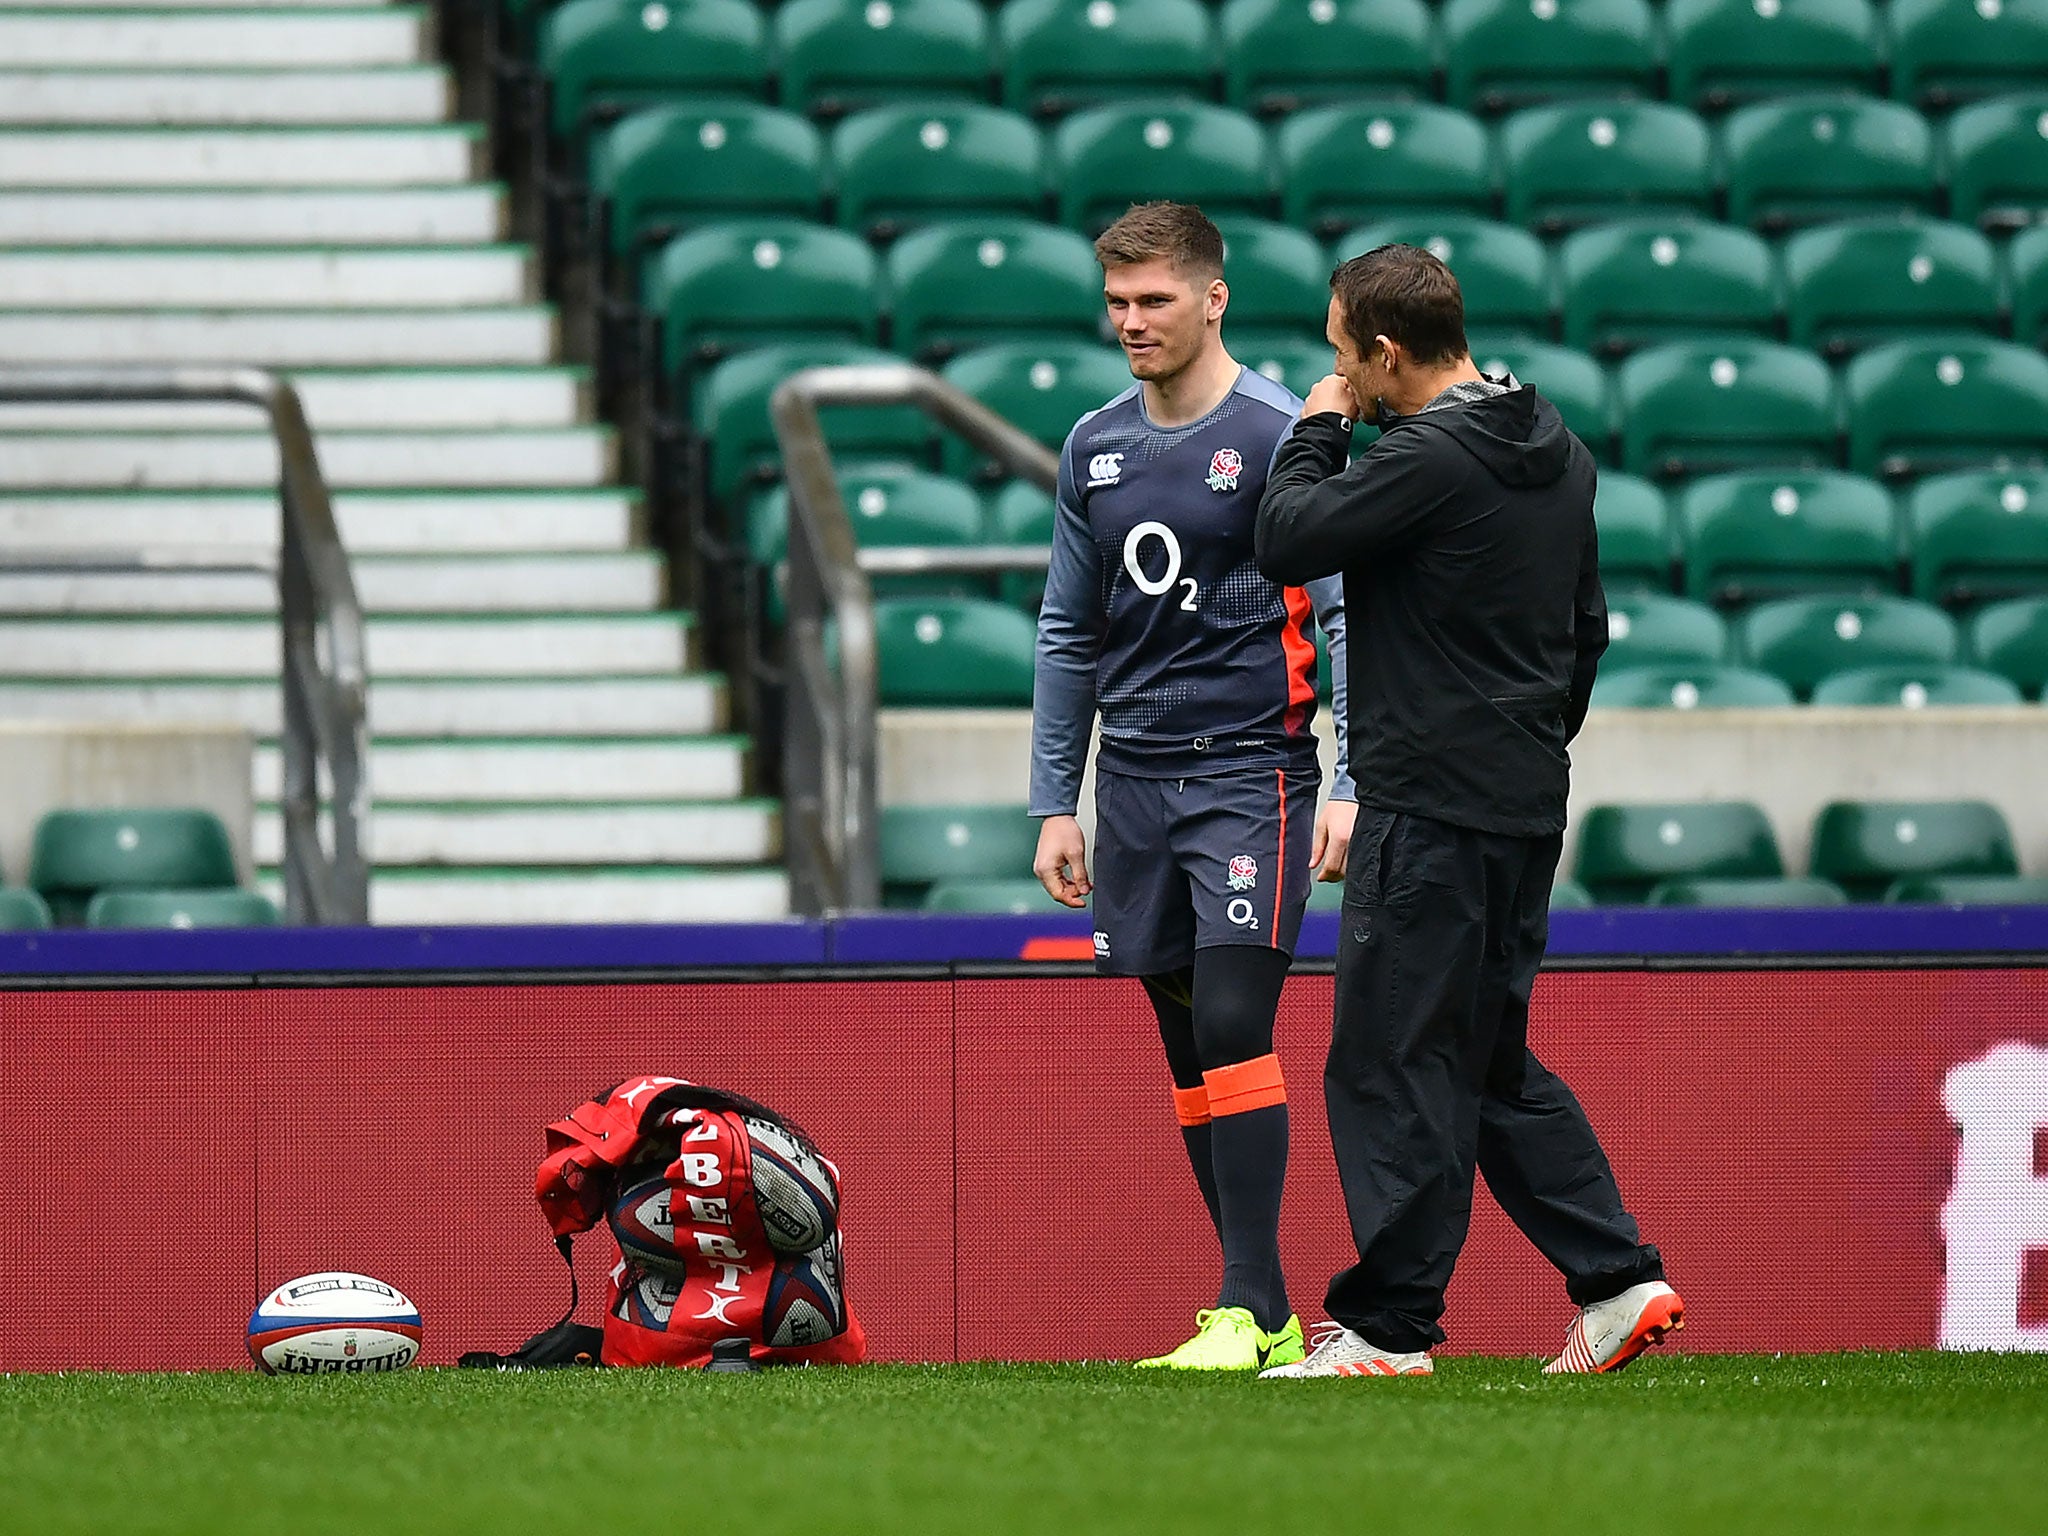 Owen Farrell trained on his own on Friday